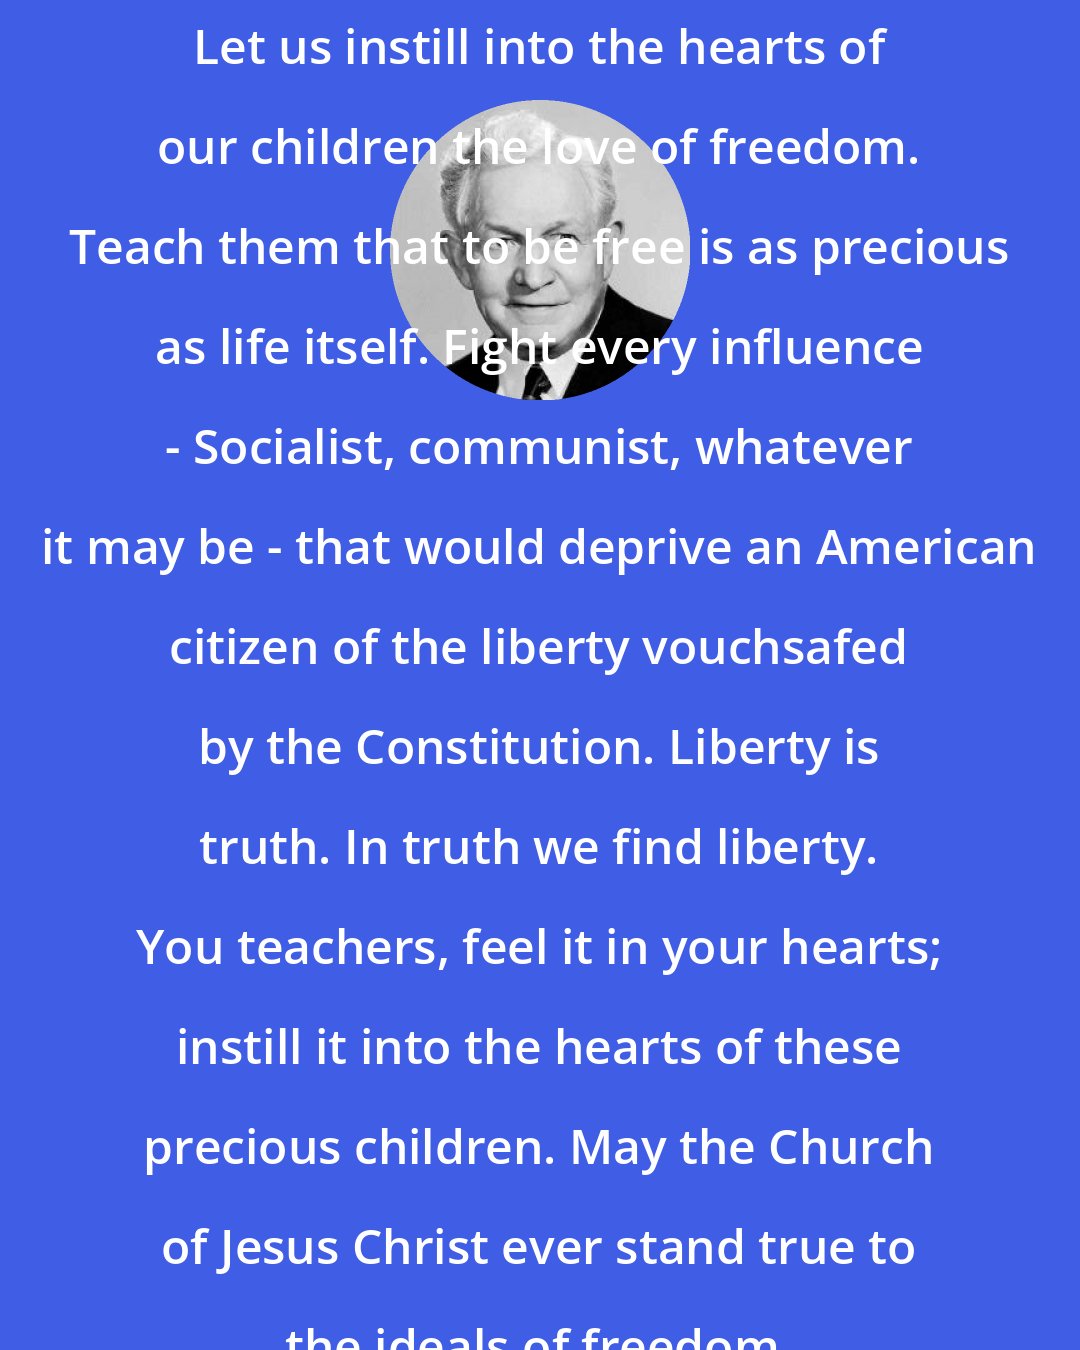 David O. McKay: Let us instill into the hearts of our children the love of freedom. Teach them that to be free is as precious as life itself. Fight every influence - Socialist, communist, whatever it may be - that would deprive an American citizen of the liberty vouchsafed by the Constitution. Liberty is truth. In truth we find liberty. You teachers, feel it in your hearts; instill it into the hearts of these precious children. May the Church of Jesus Christ ever stand true to the ideals of freedom.